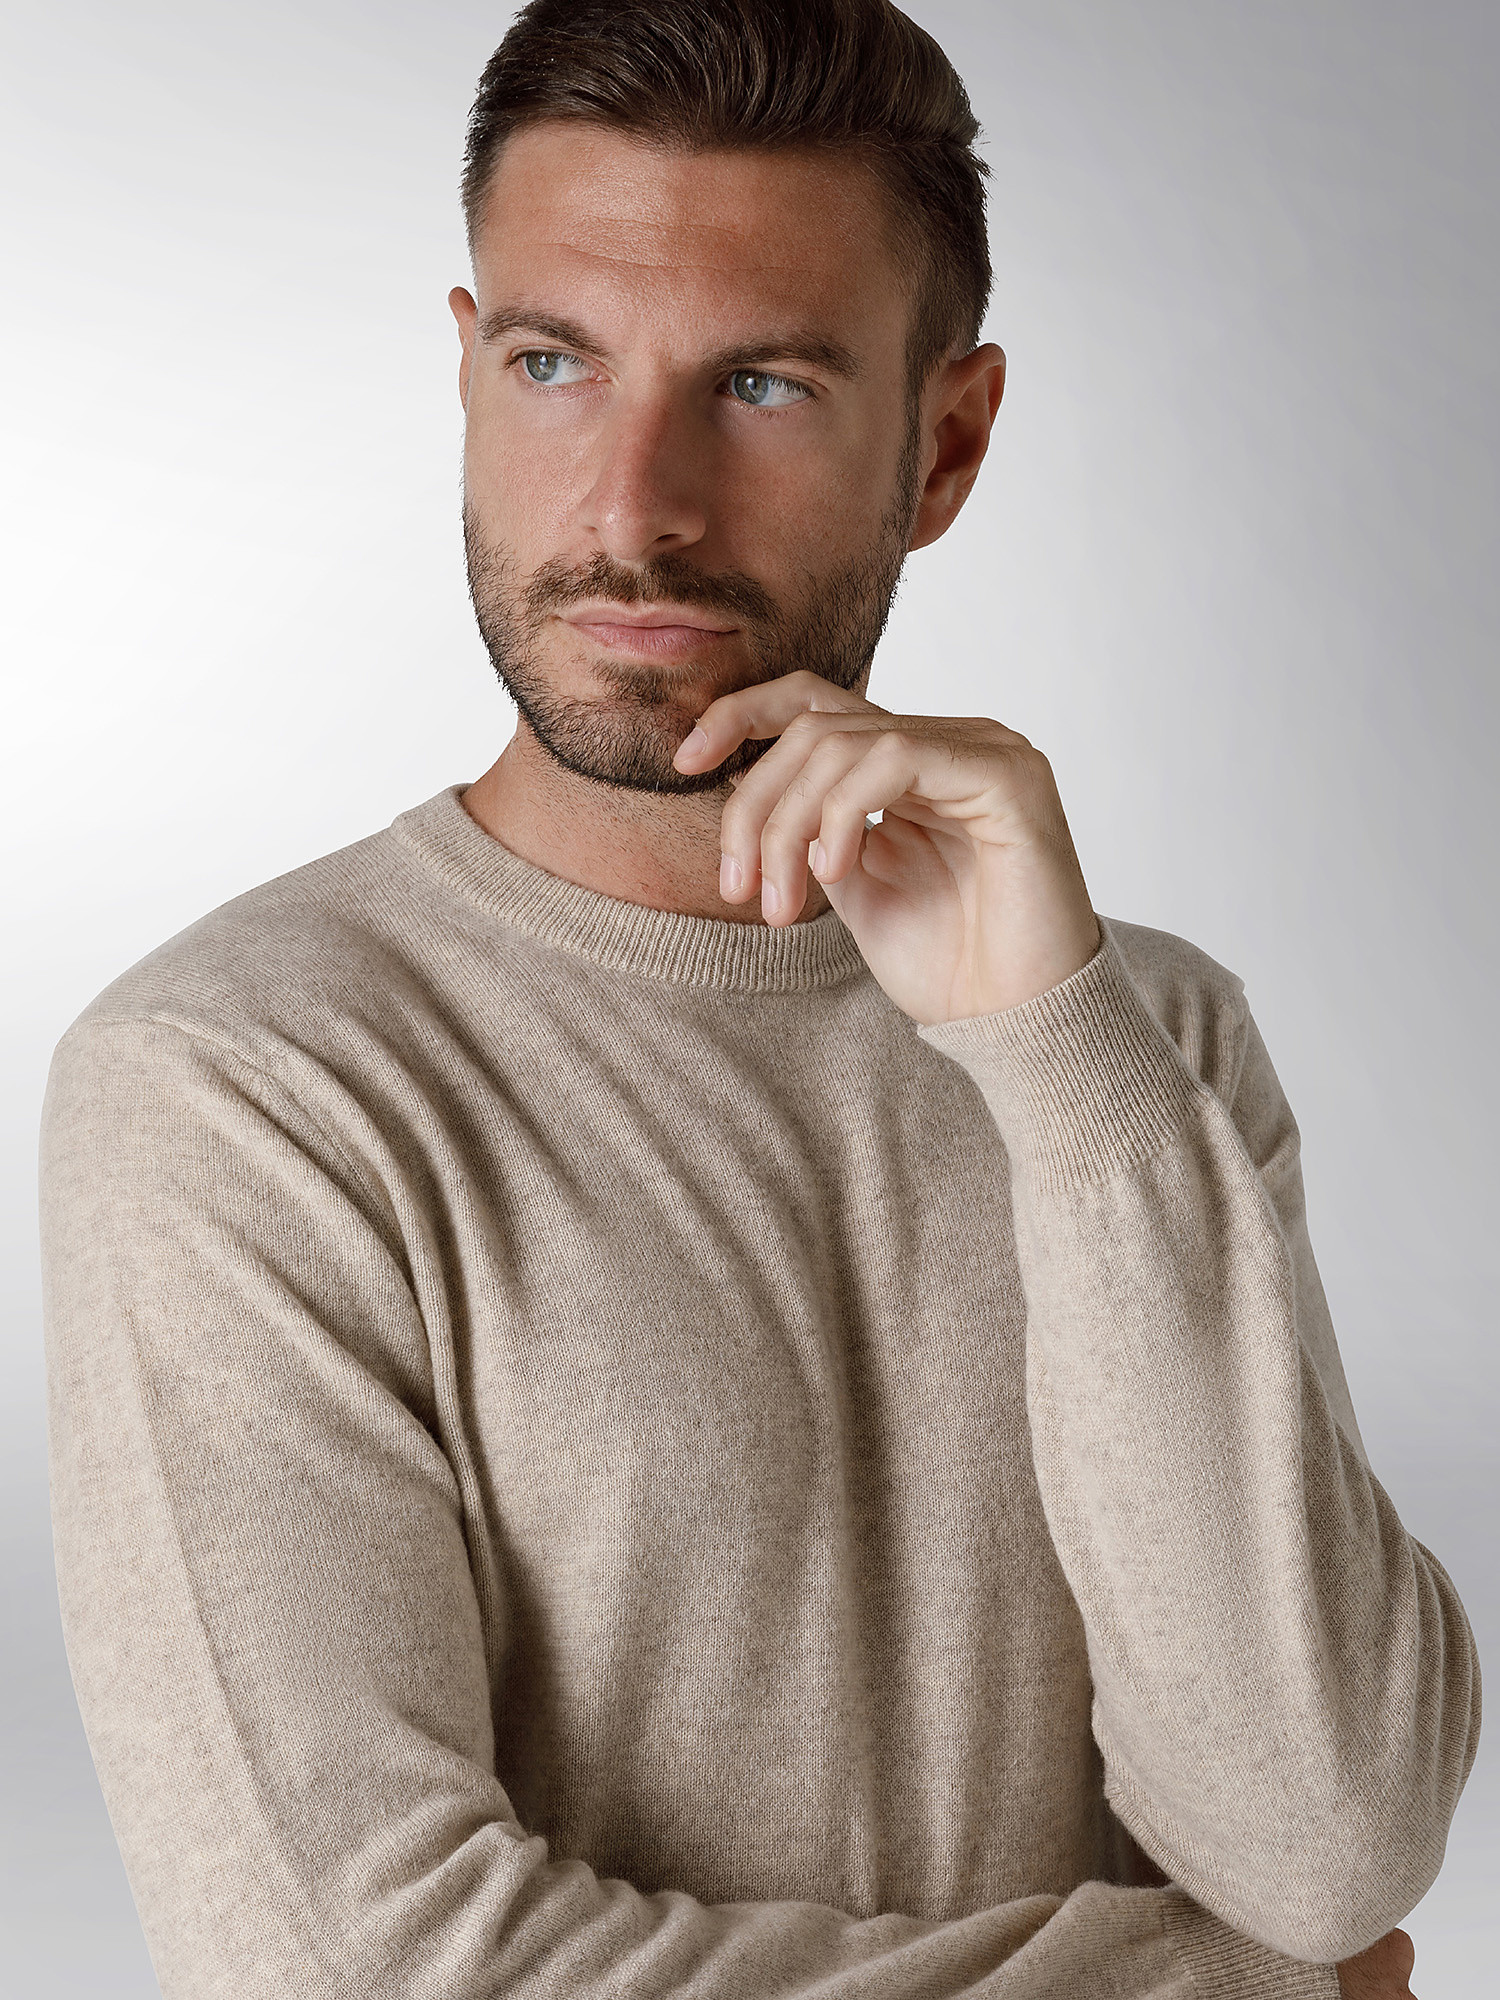 Coin Cashmere - Crewneck sweater in pure cashmere, Beige, large image number 3